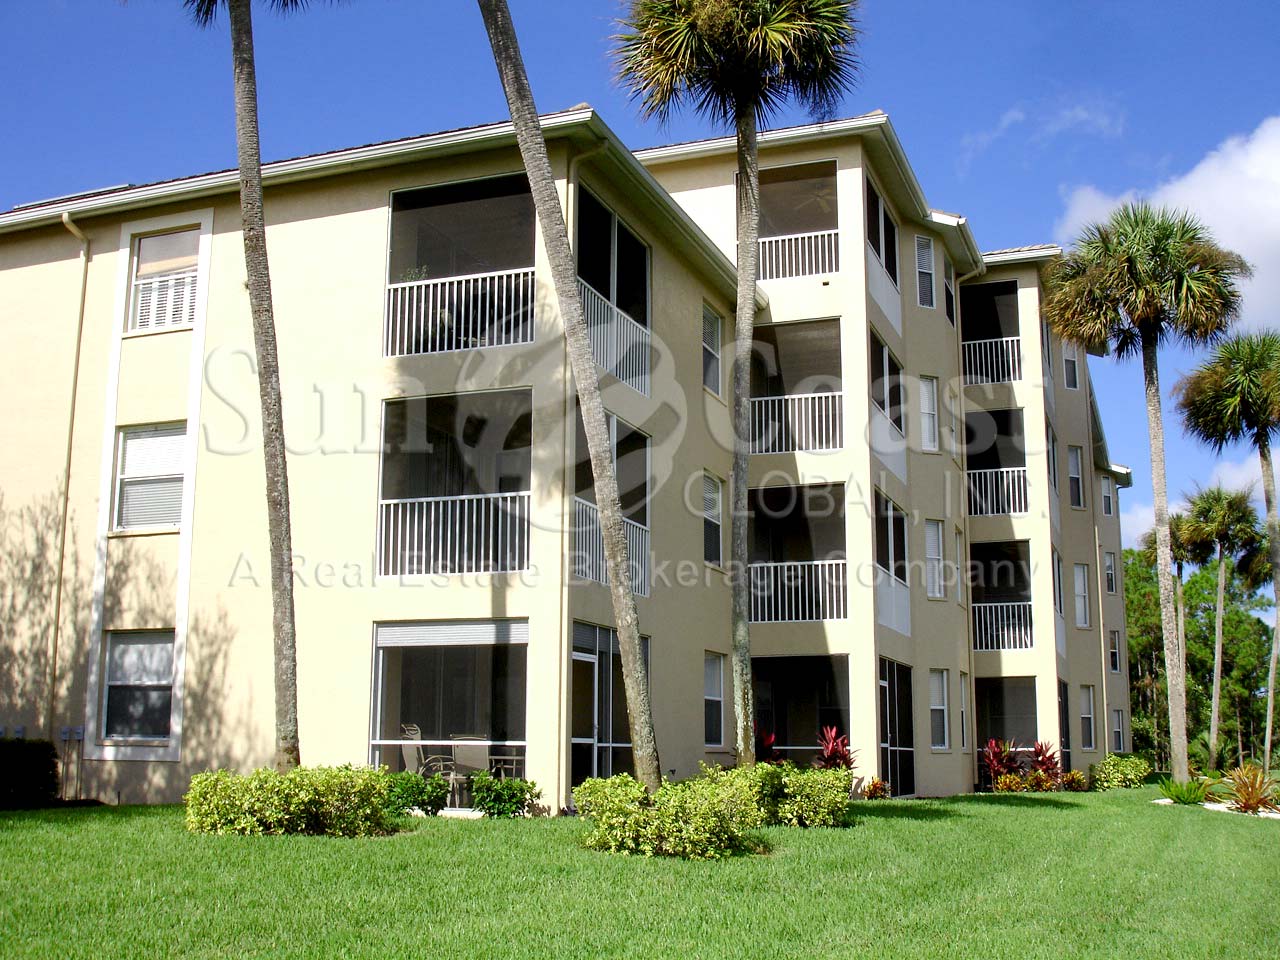 Prestwick is a non gated community within the gated community of Naples Heritage.